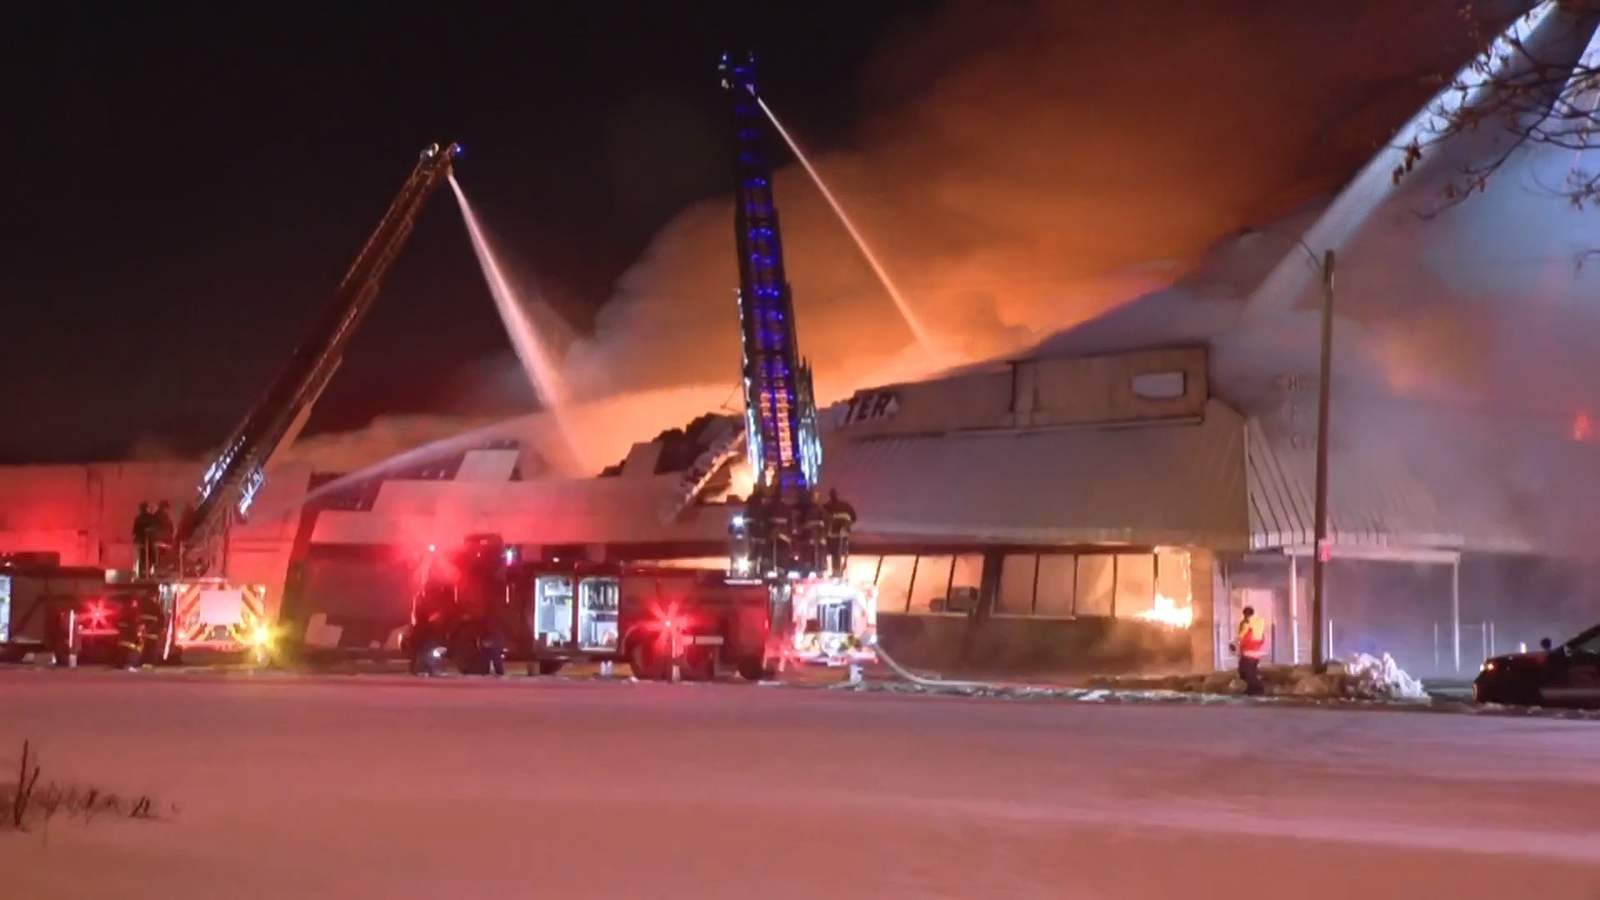 Detroit grocery store destroyed in large fire on city’s east side